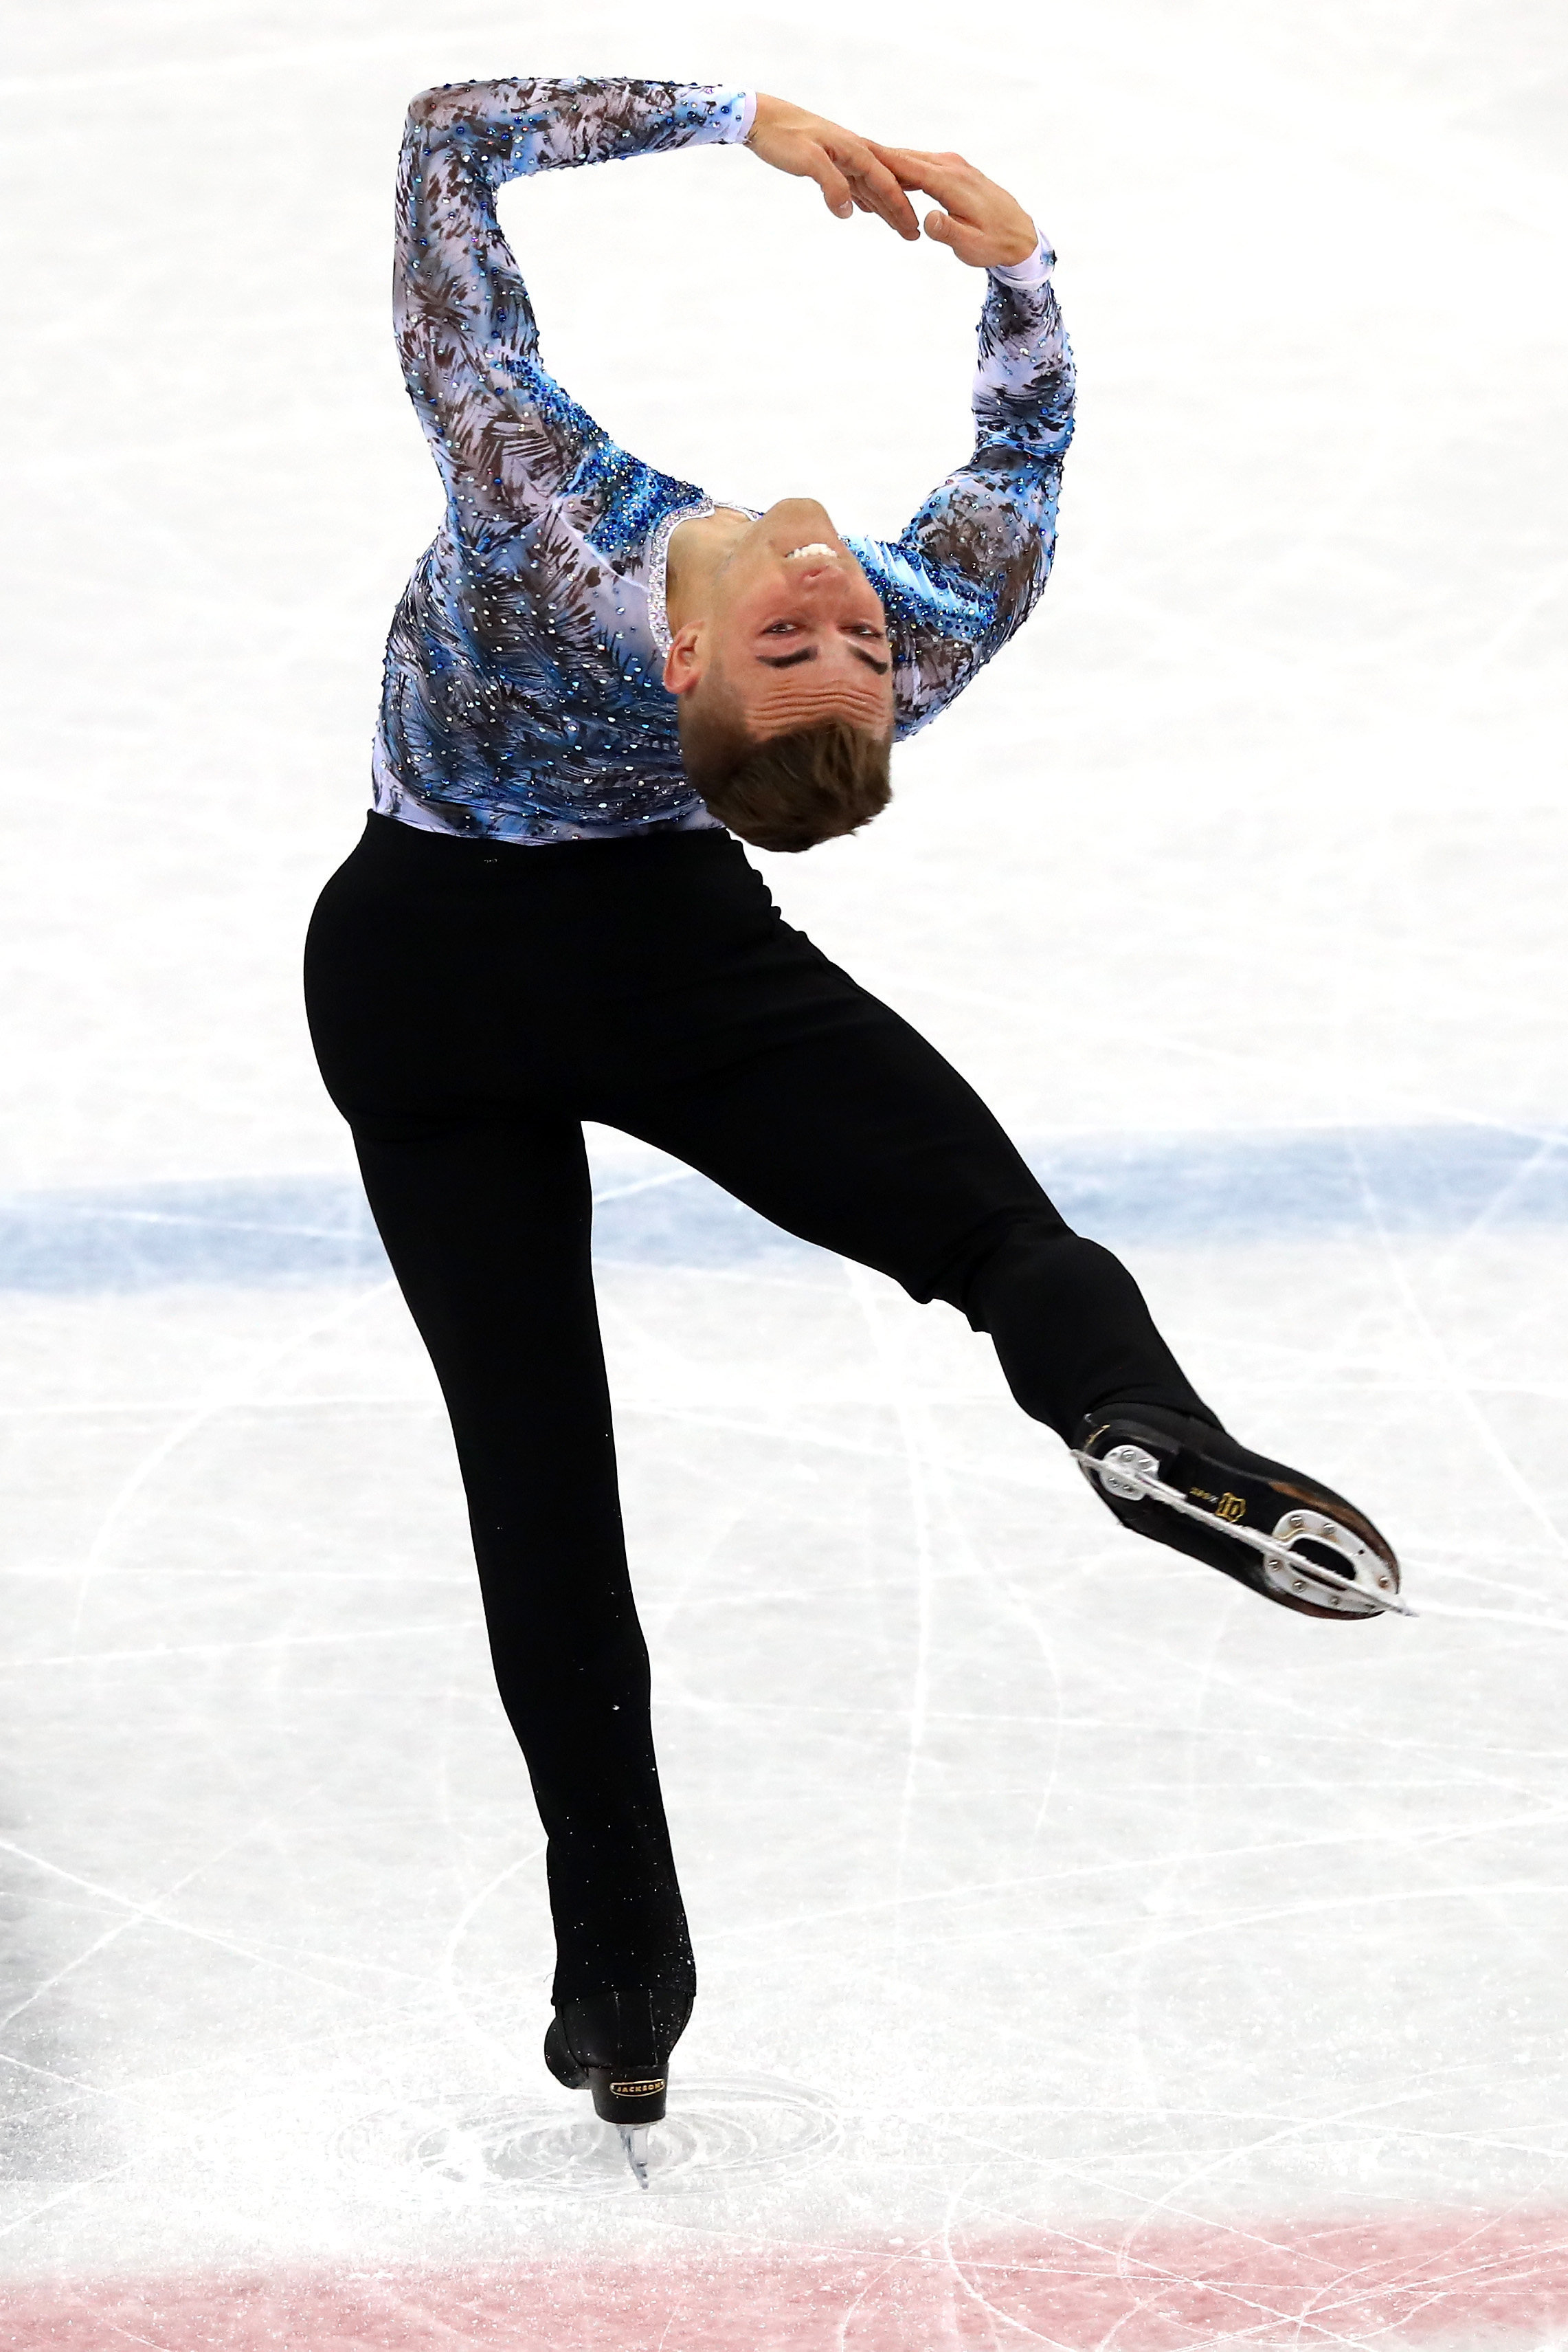 Adam Rippon of the United States competes in the Figure Skating Team Event  Men's Single Free Skating on day three of the PyeongChang 2018 Winter Olympic Games at Gangneung Ice Arena on Feb. 12, 2018 in Gangneung, South Korea. (Dean Mouhtaropoulos—Getty Images)